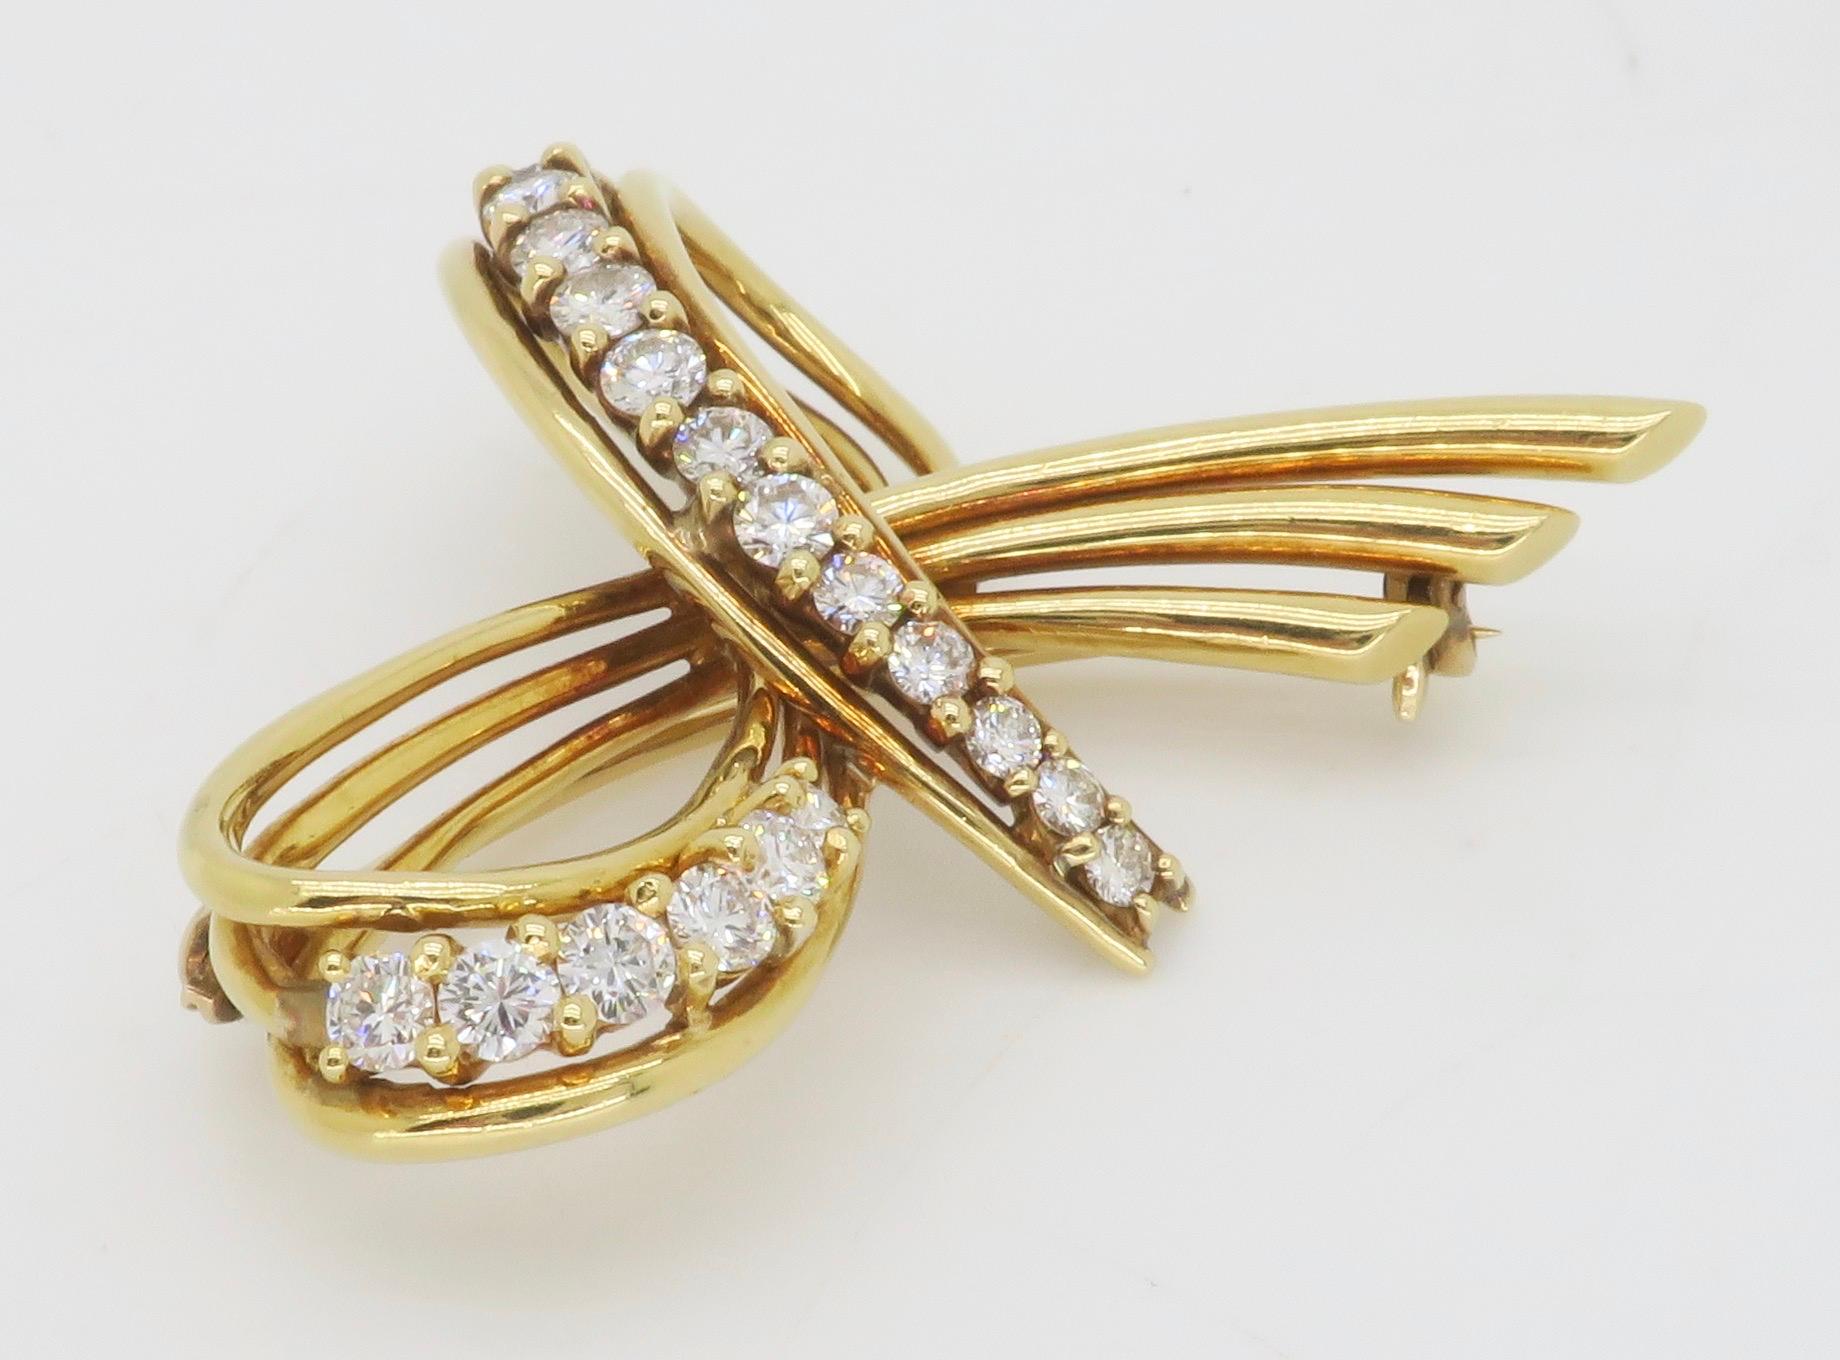 Vintage Tiffany & Co. Diamond Bow Brooch in 18k Yellow Gold  In Excellent Condition For Sale In Webster, NY